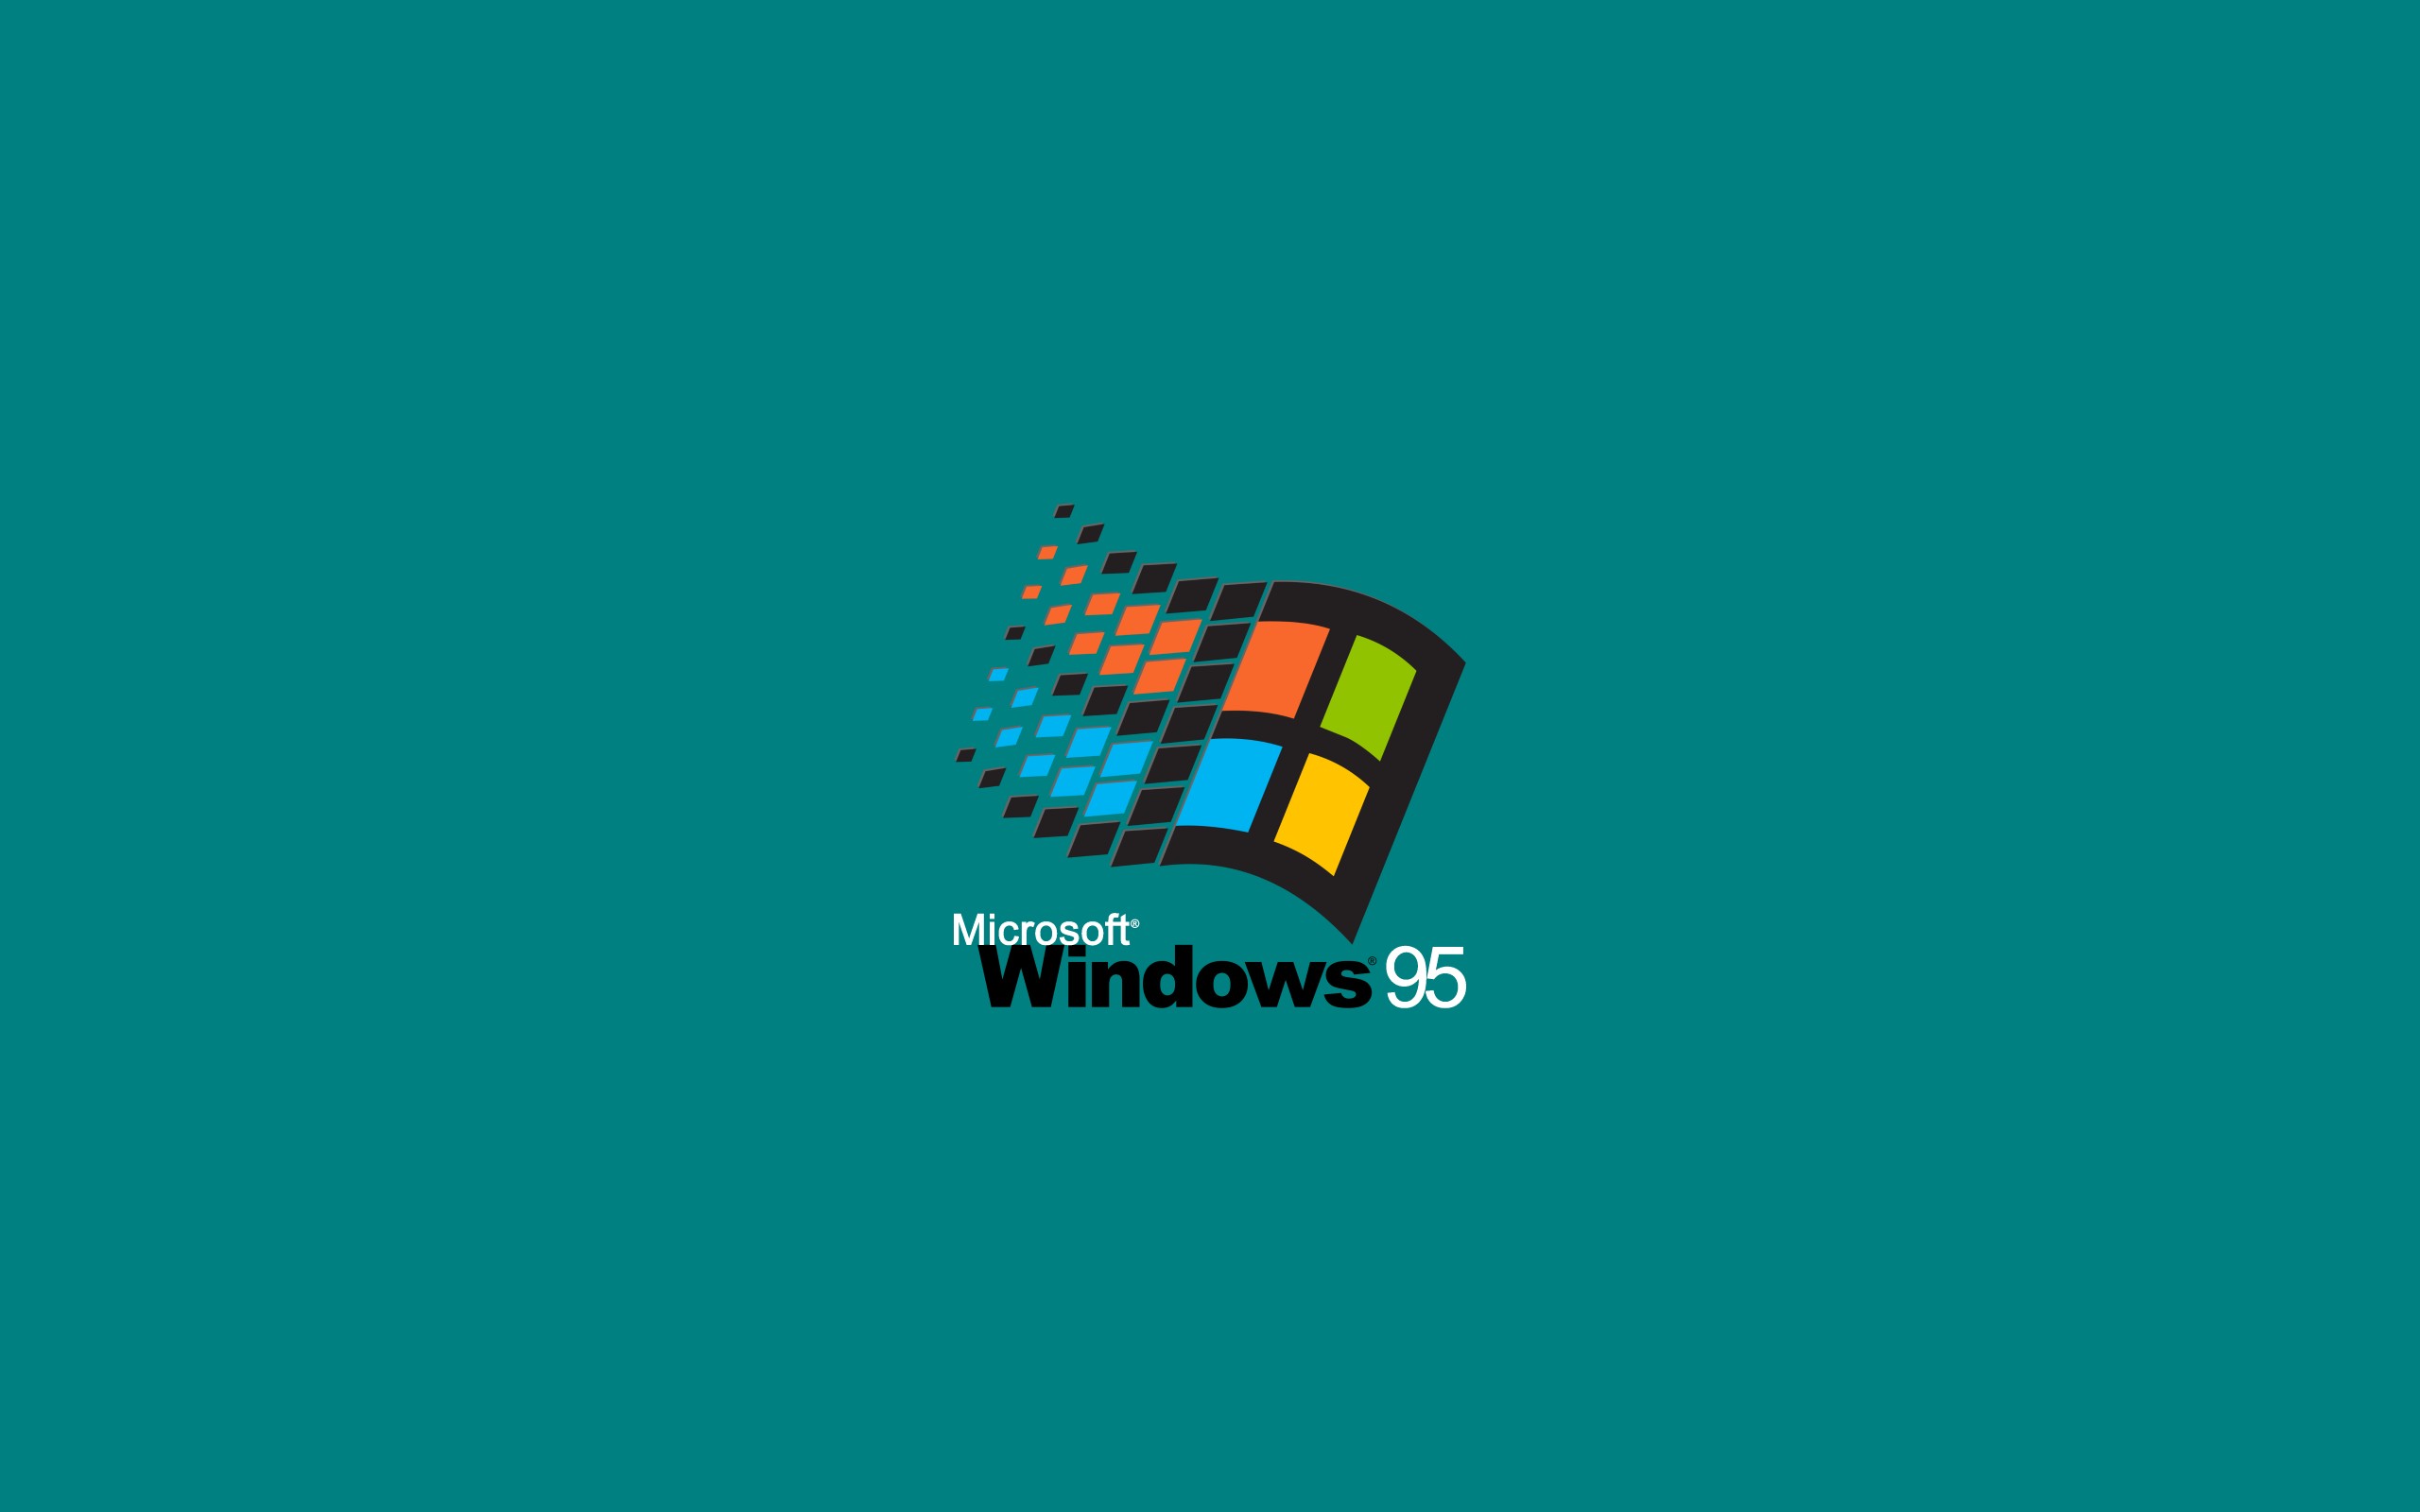 window, Windows 95, Microsoft Windows, Microsoft, Green background, Minimalism, Simple background, Simple, Logo, Operating systems, Computer, Nostalgia, Vintage Wallpaper